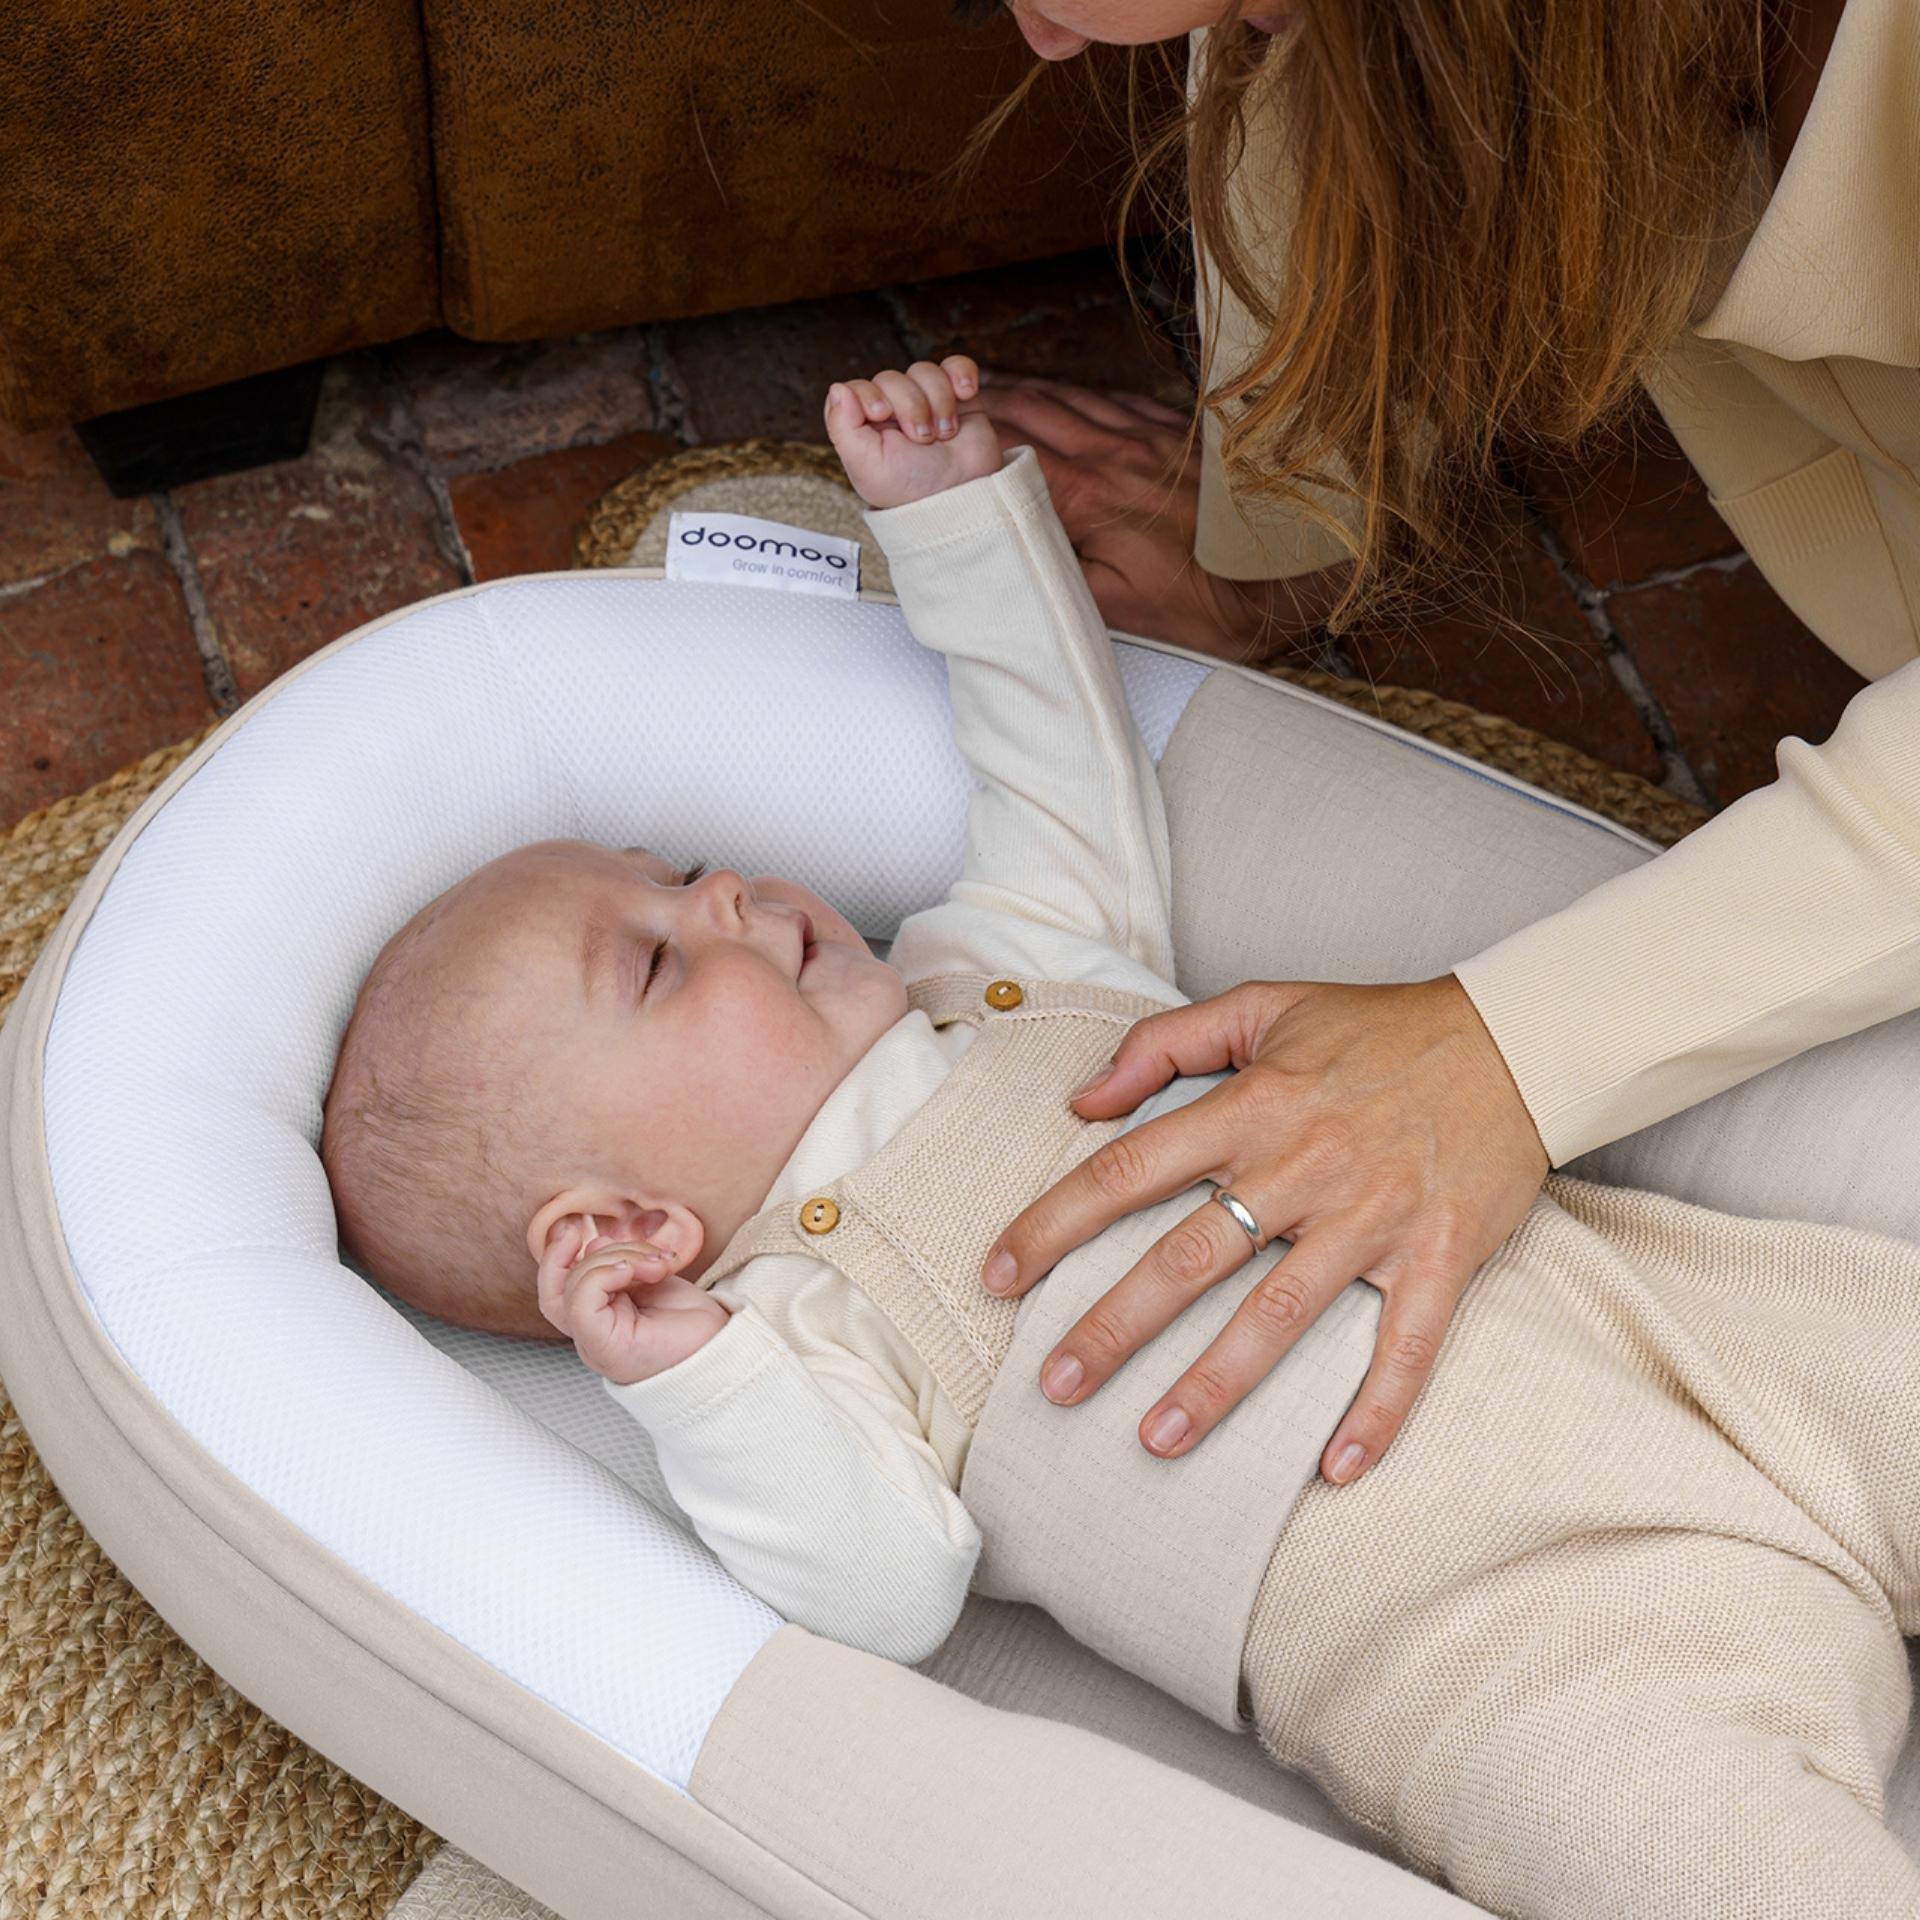 Doomoo - Comfortable and Versatile Baby Products at NordBaby